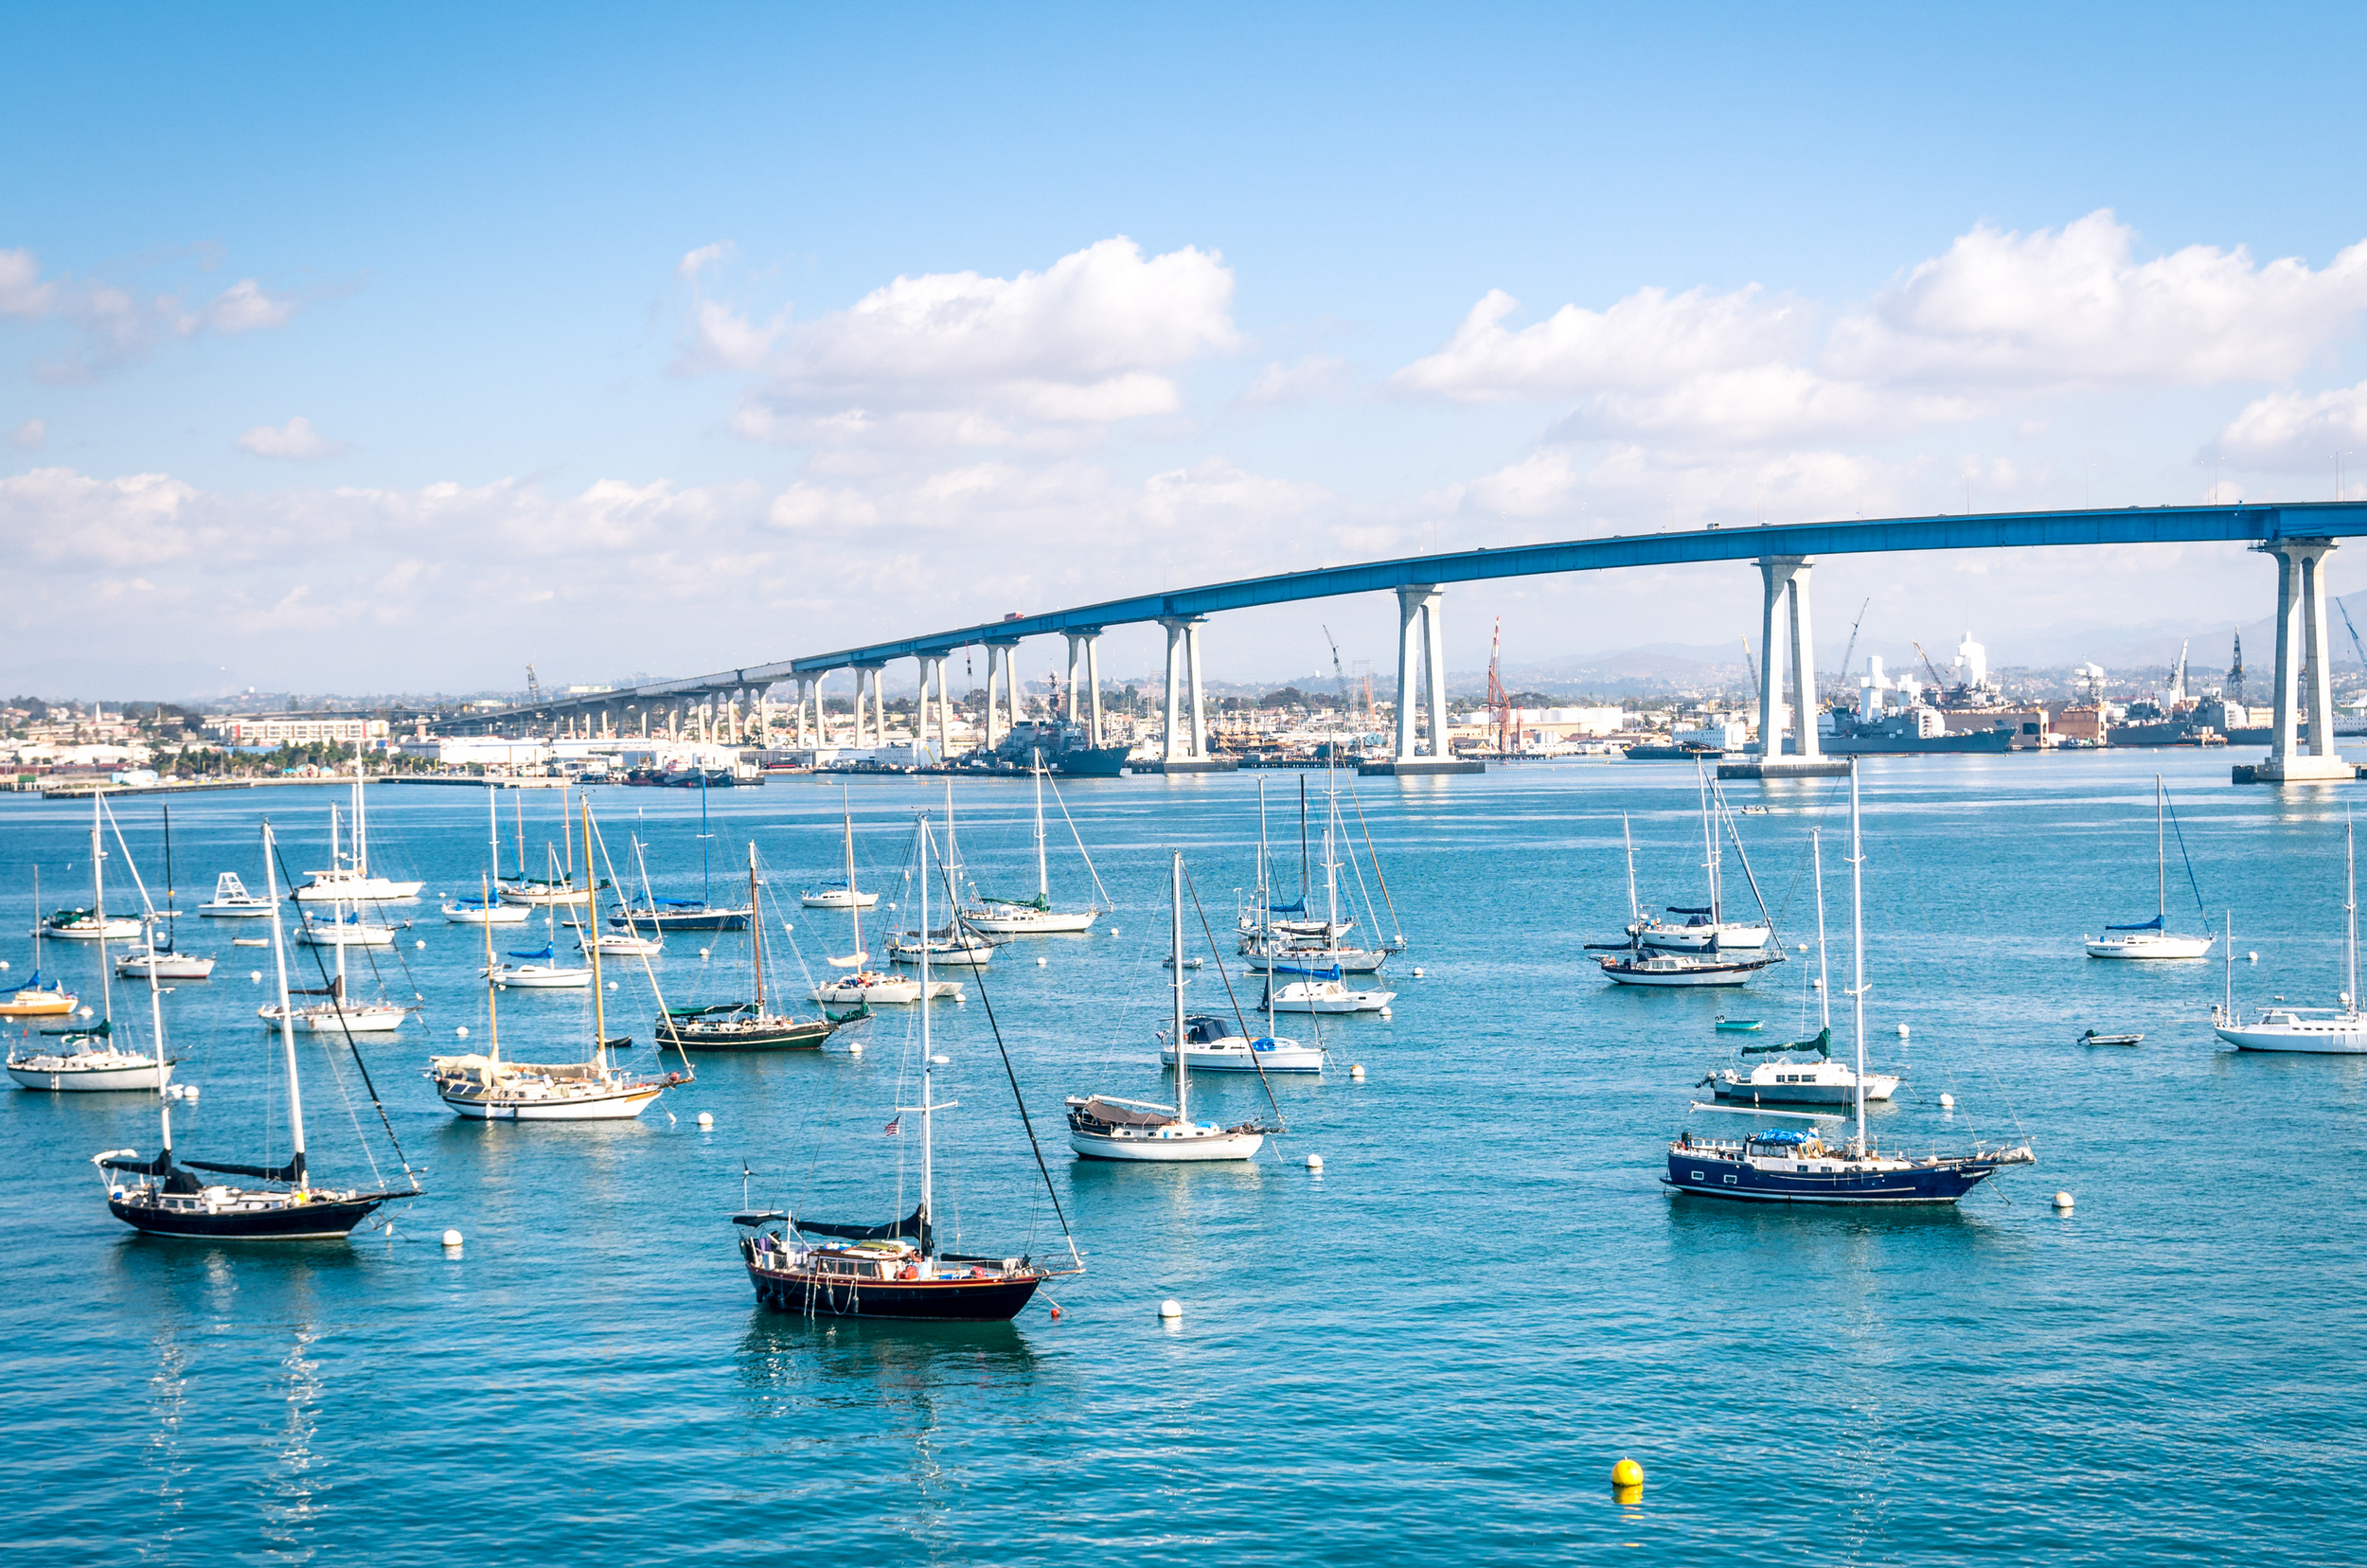 San Diego waterfront with sailing Boats - Industrial harbor and C